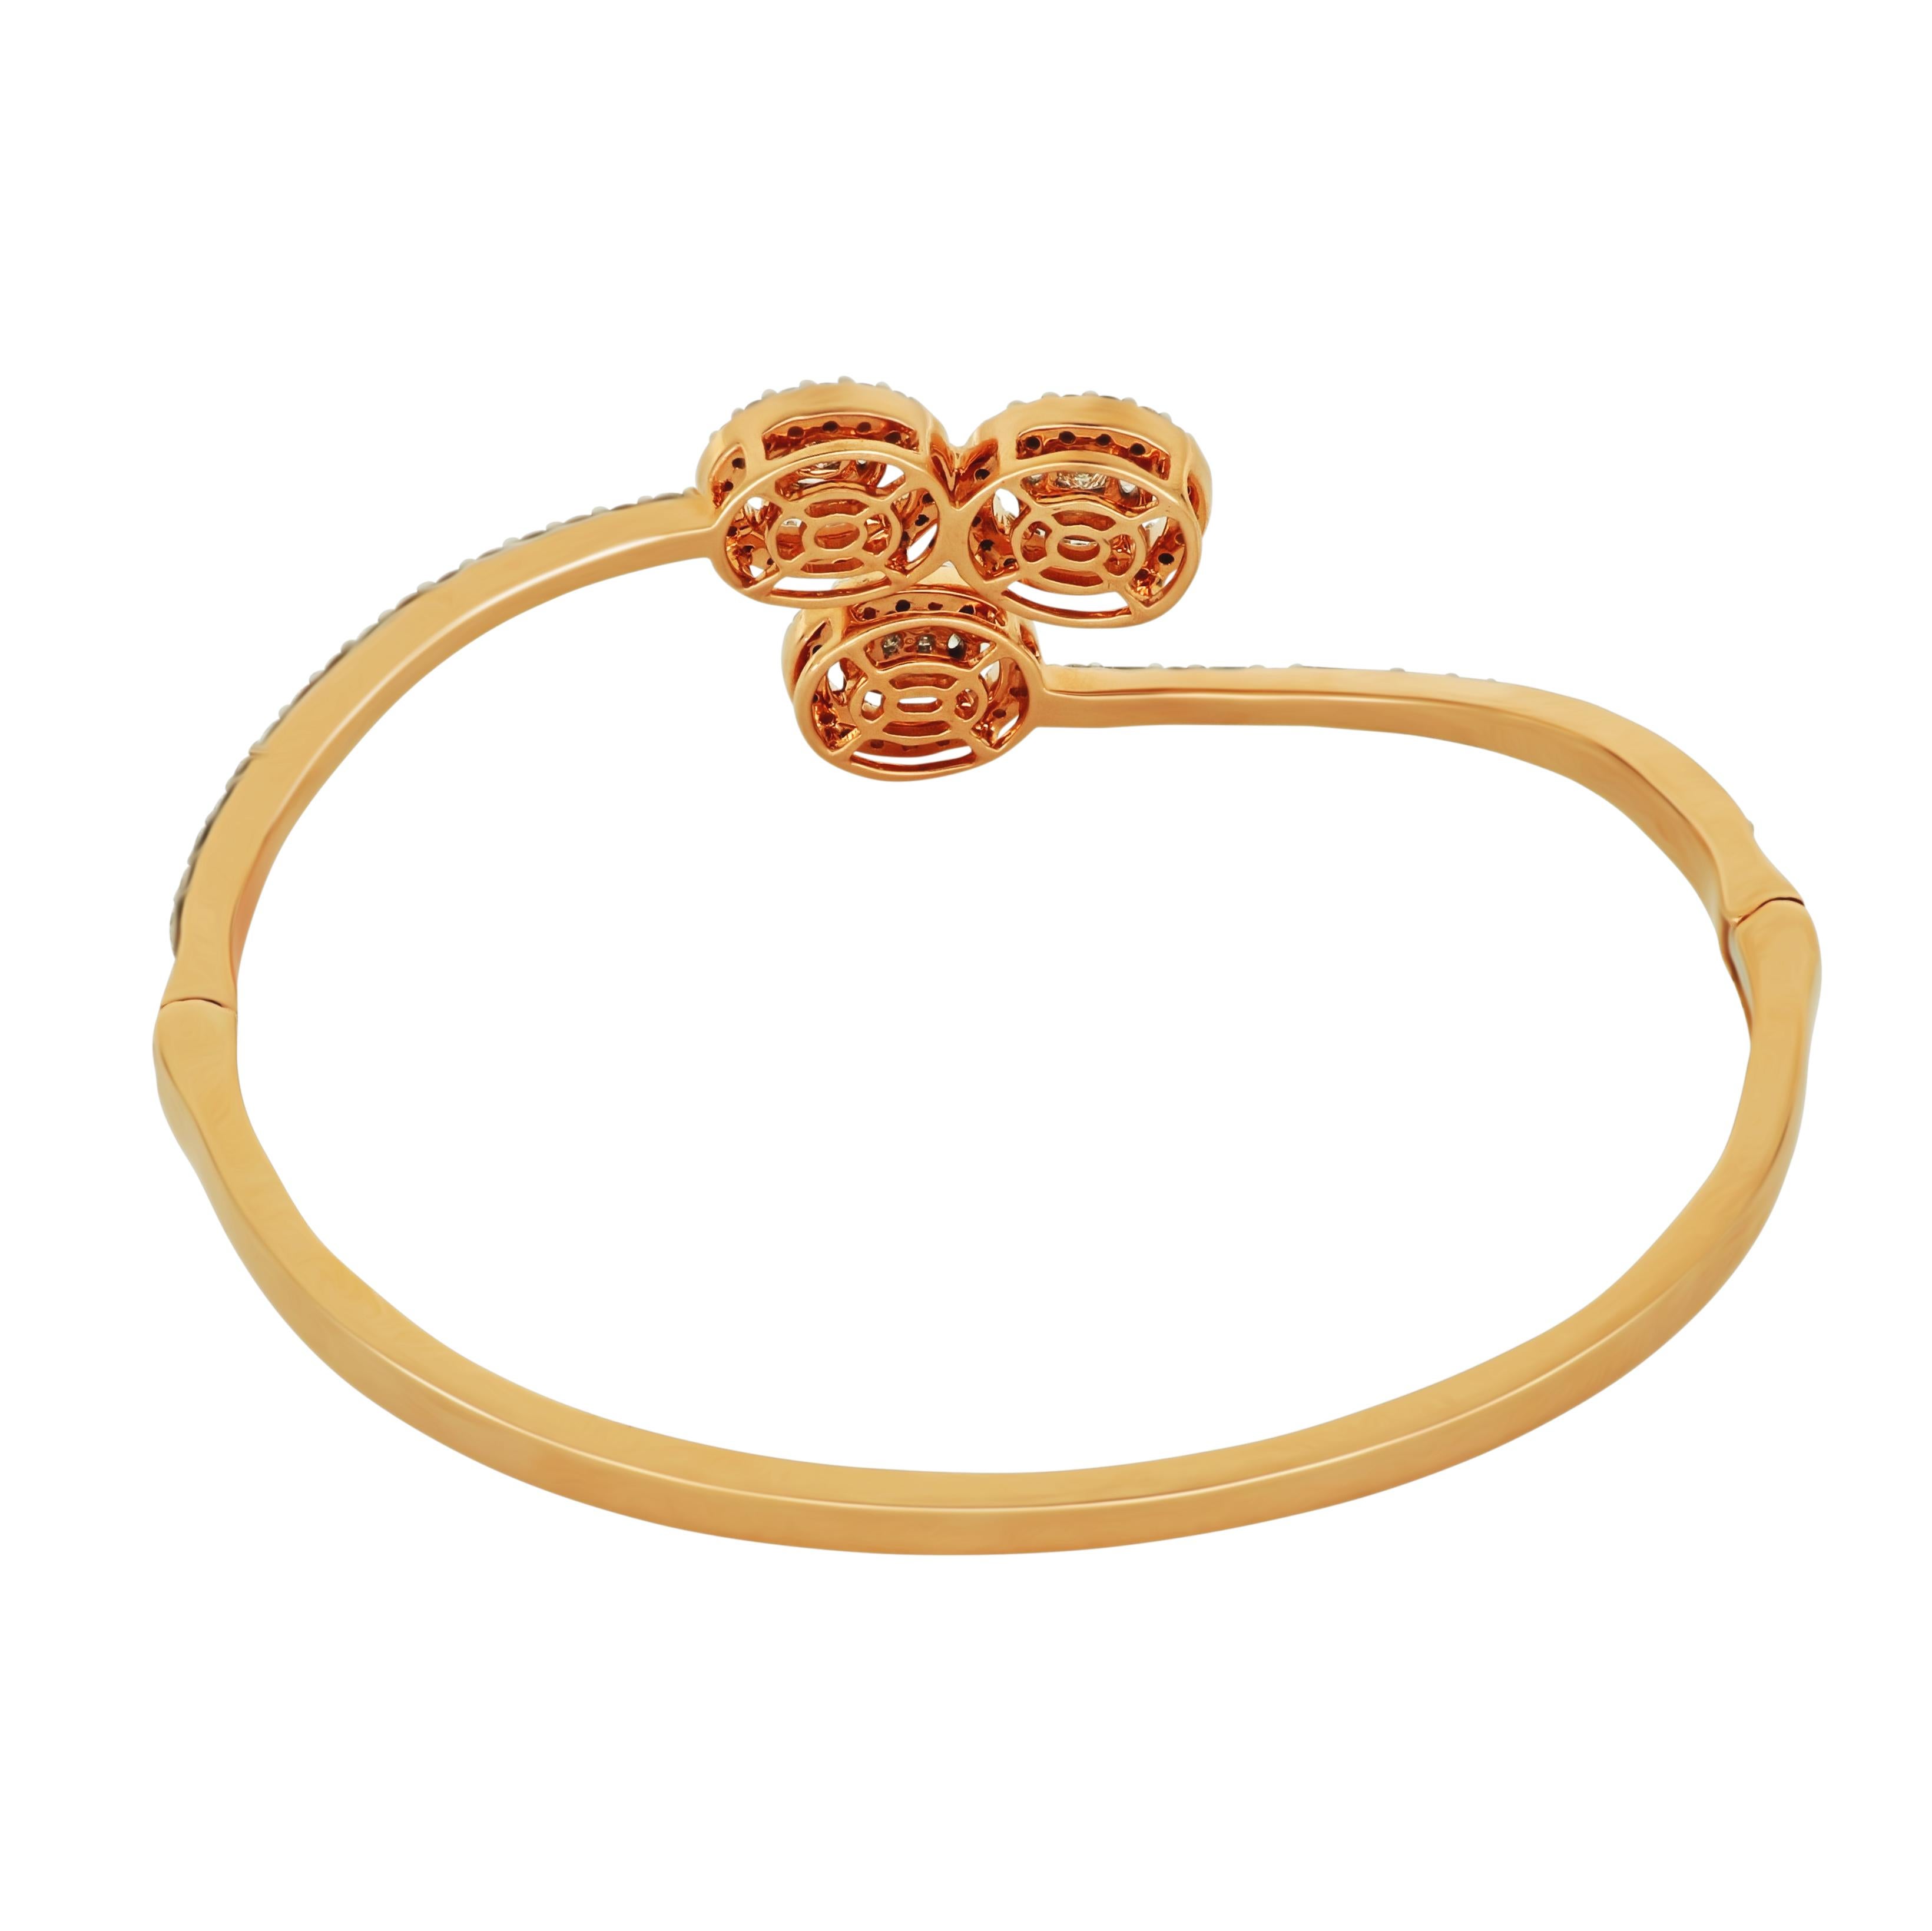 The creative setting of this romantic rose gold bangle leads the eye to the beautifully 3 center round cut diamonds set at opposing angles, surrounded by a halo of small diamond and complemented by magnificent baguette and round white